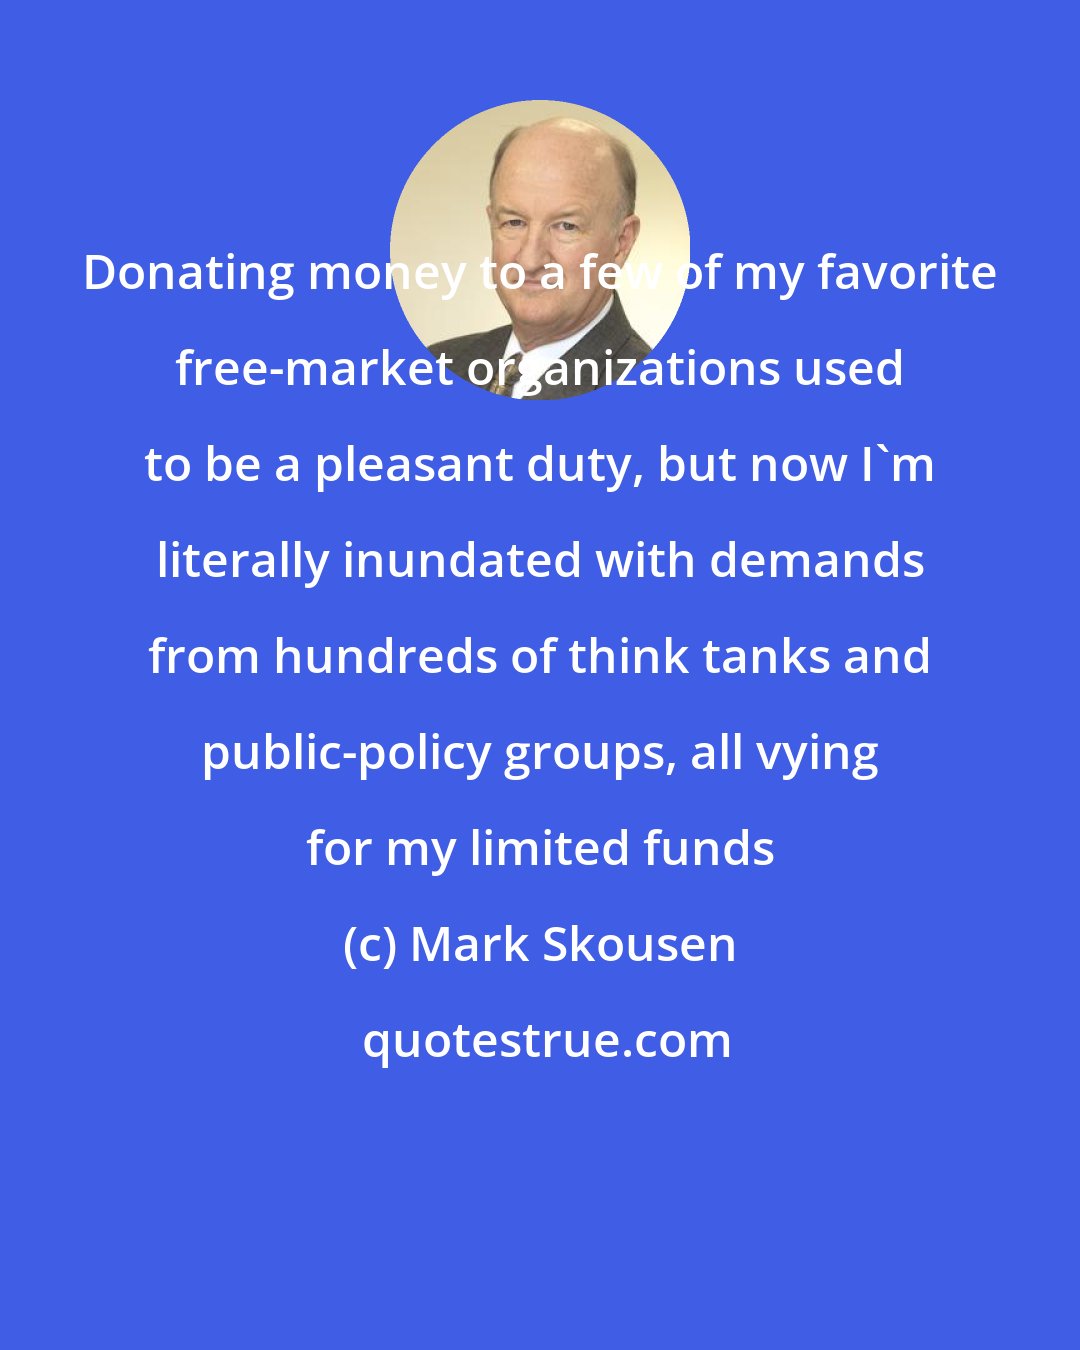 Mark Skousen: Donating money to a few of my favorite free-market organizations used to be a pleasant duty, but now I'm literally inundated with demands from hundreds of think tanks and public-policy groups, all vying for my limited funds